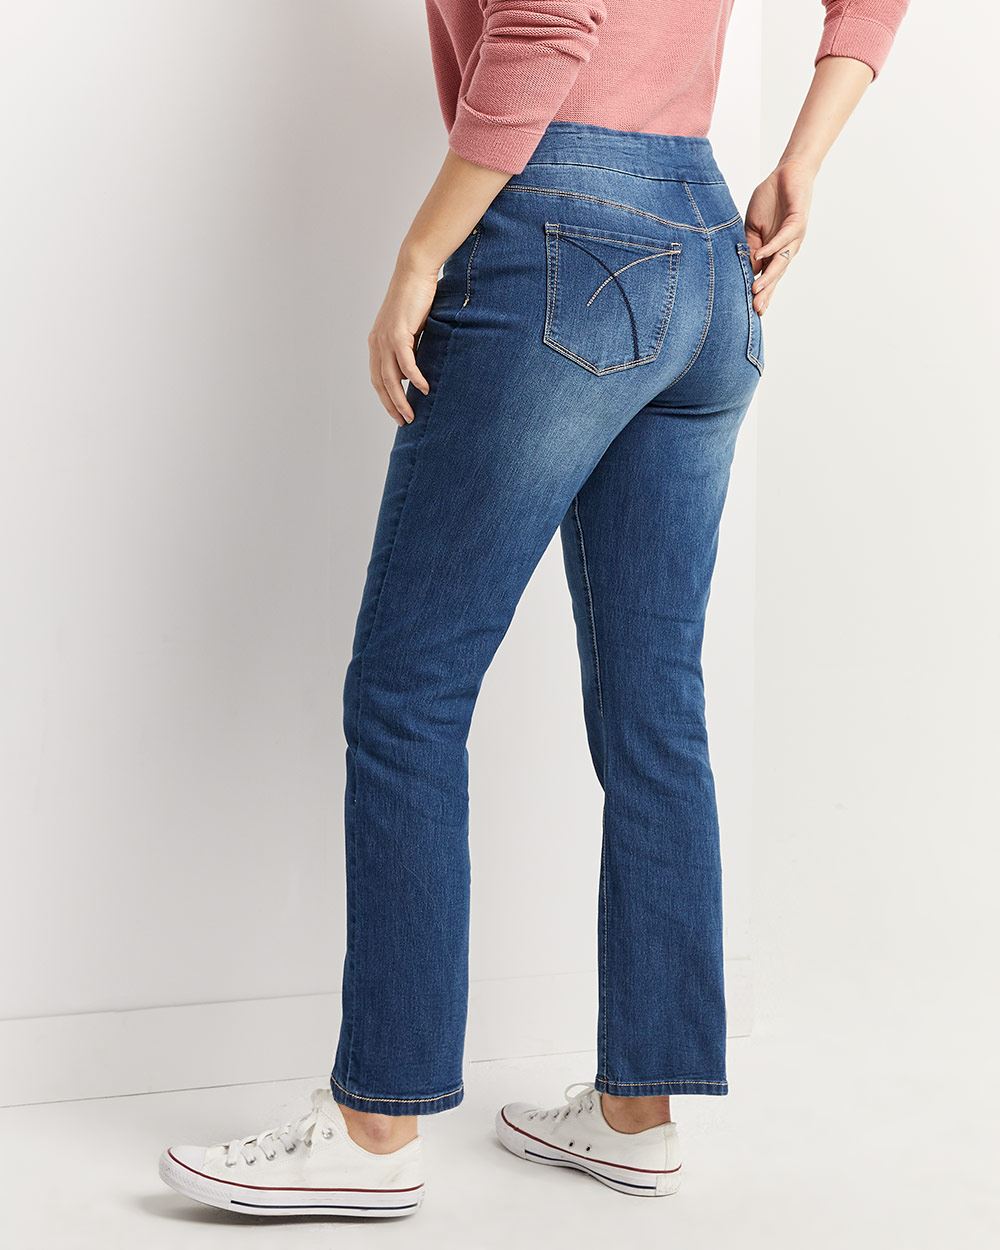 Straight Pull On Jeans The Original Comfort